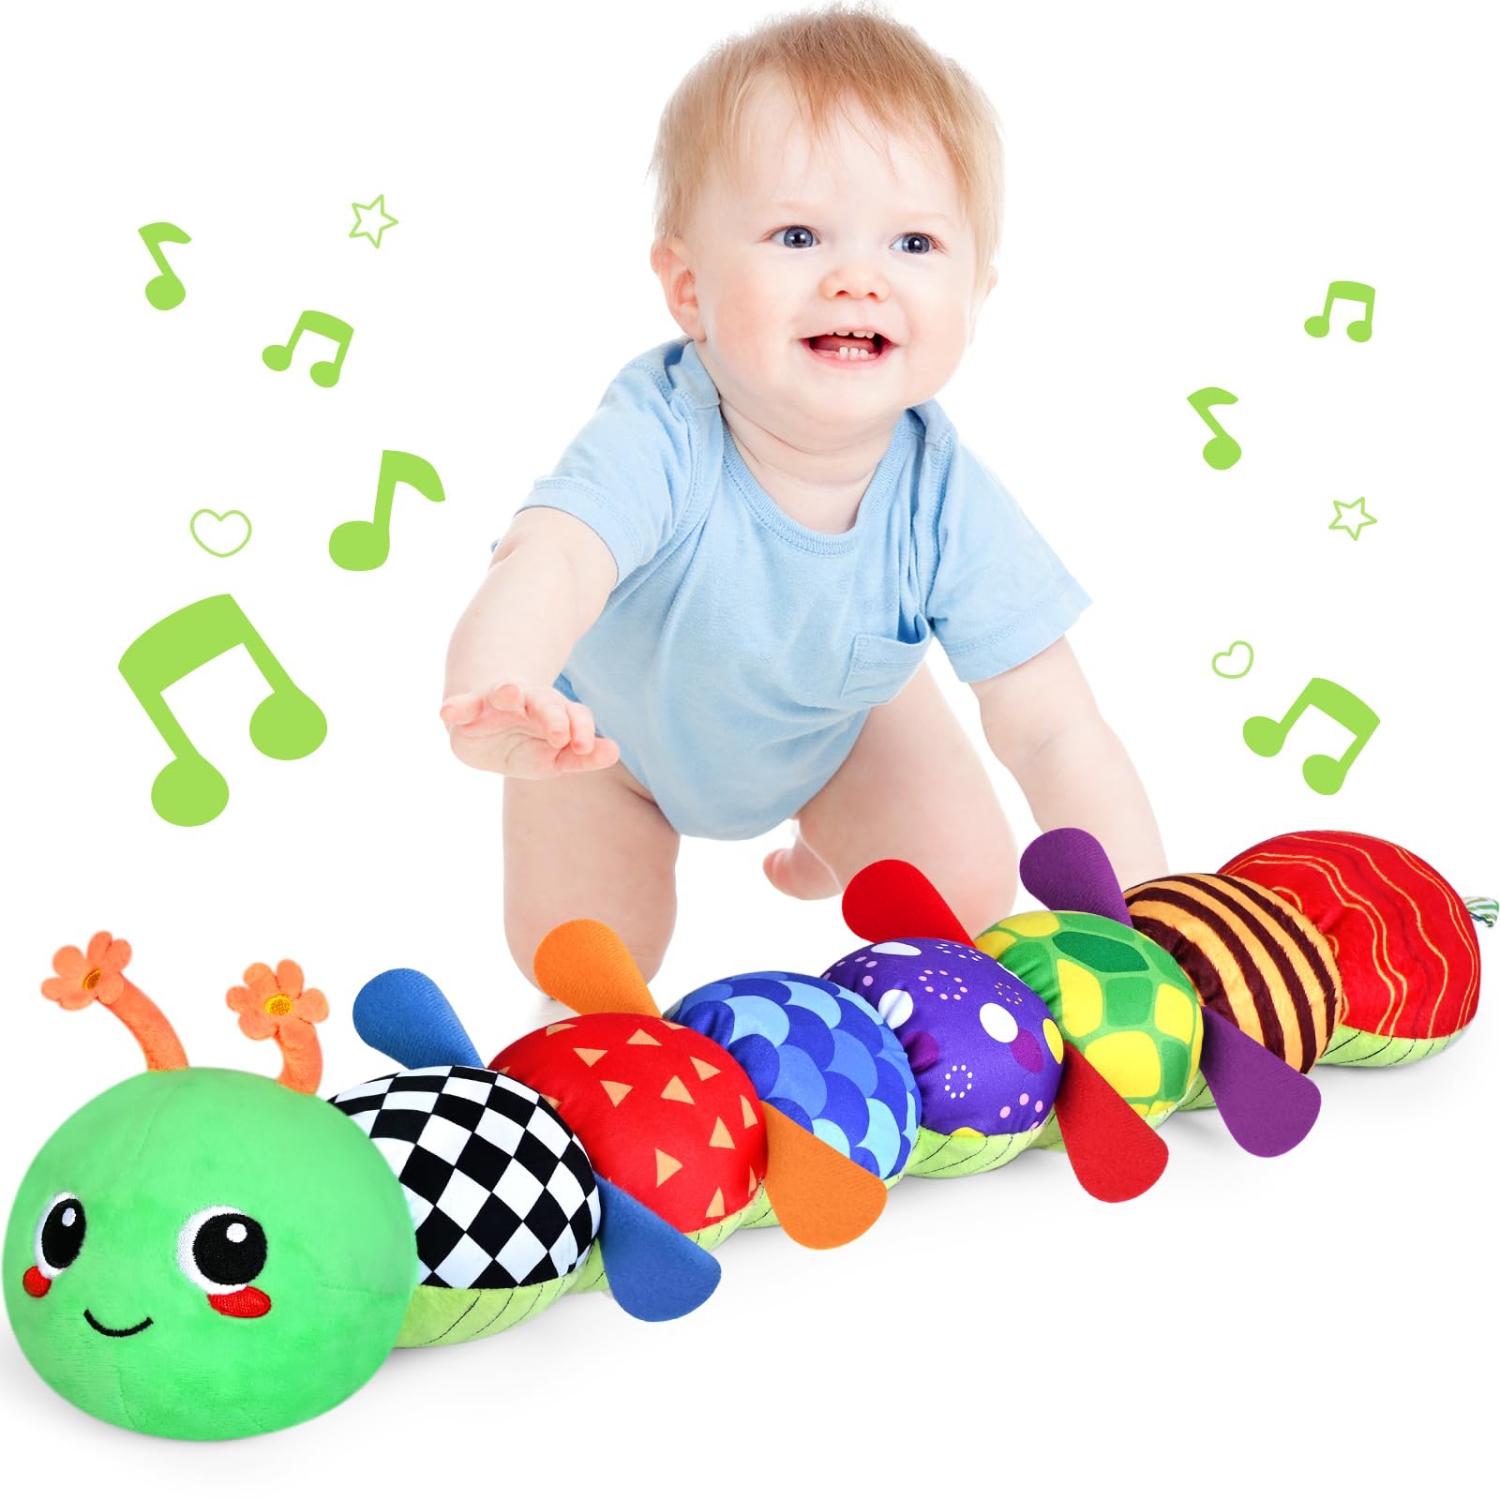 Adorable Infant Musical Stuffed Animal Toys for 0-12 Months, Soft Sensory Toys with Crinkle and Rattles, Perfect for Tummy Time, Caterpillar Design in Pink and Green